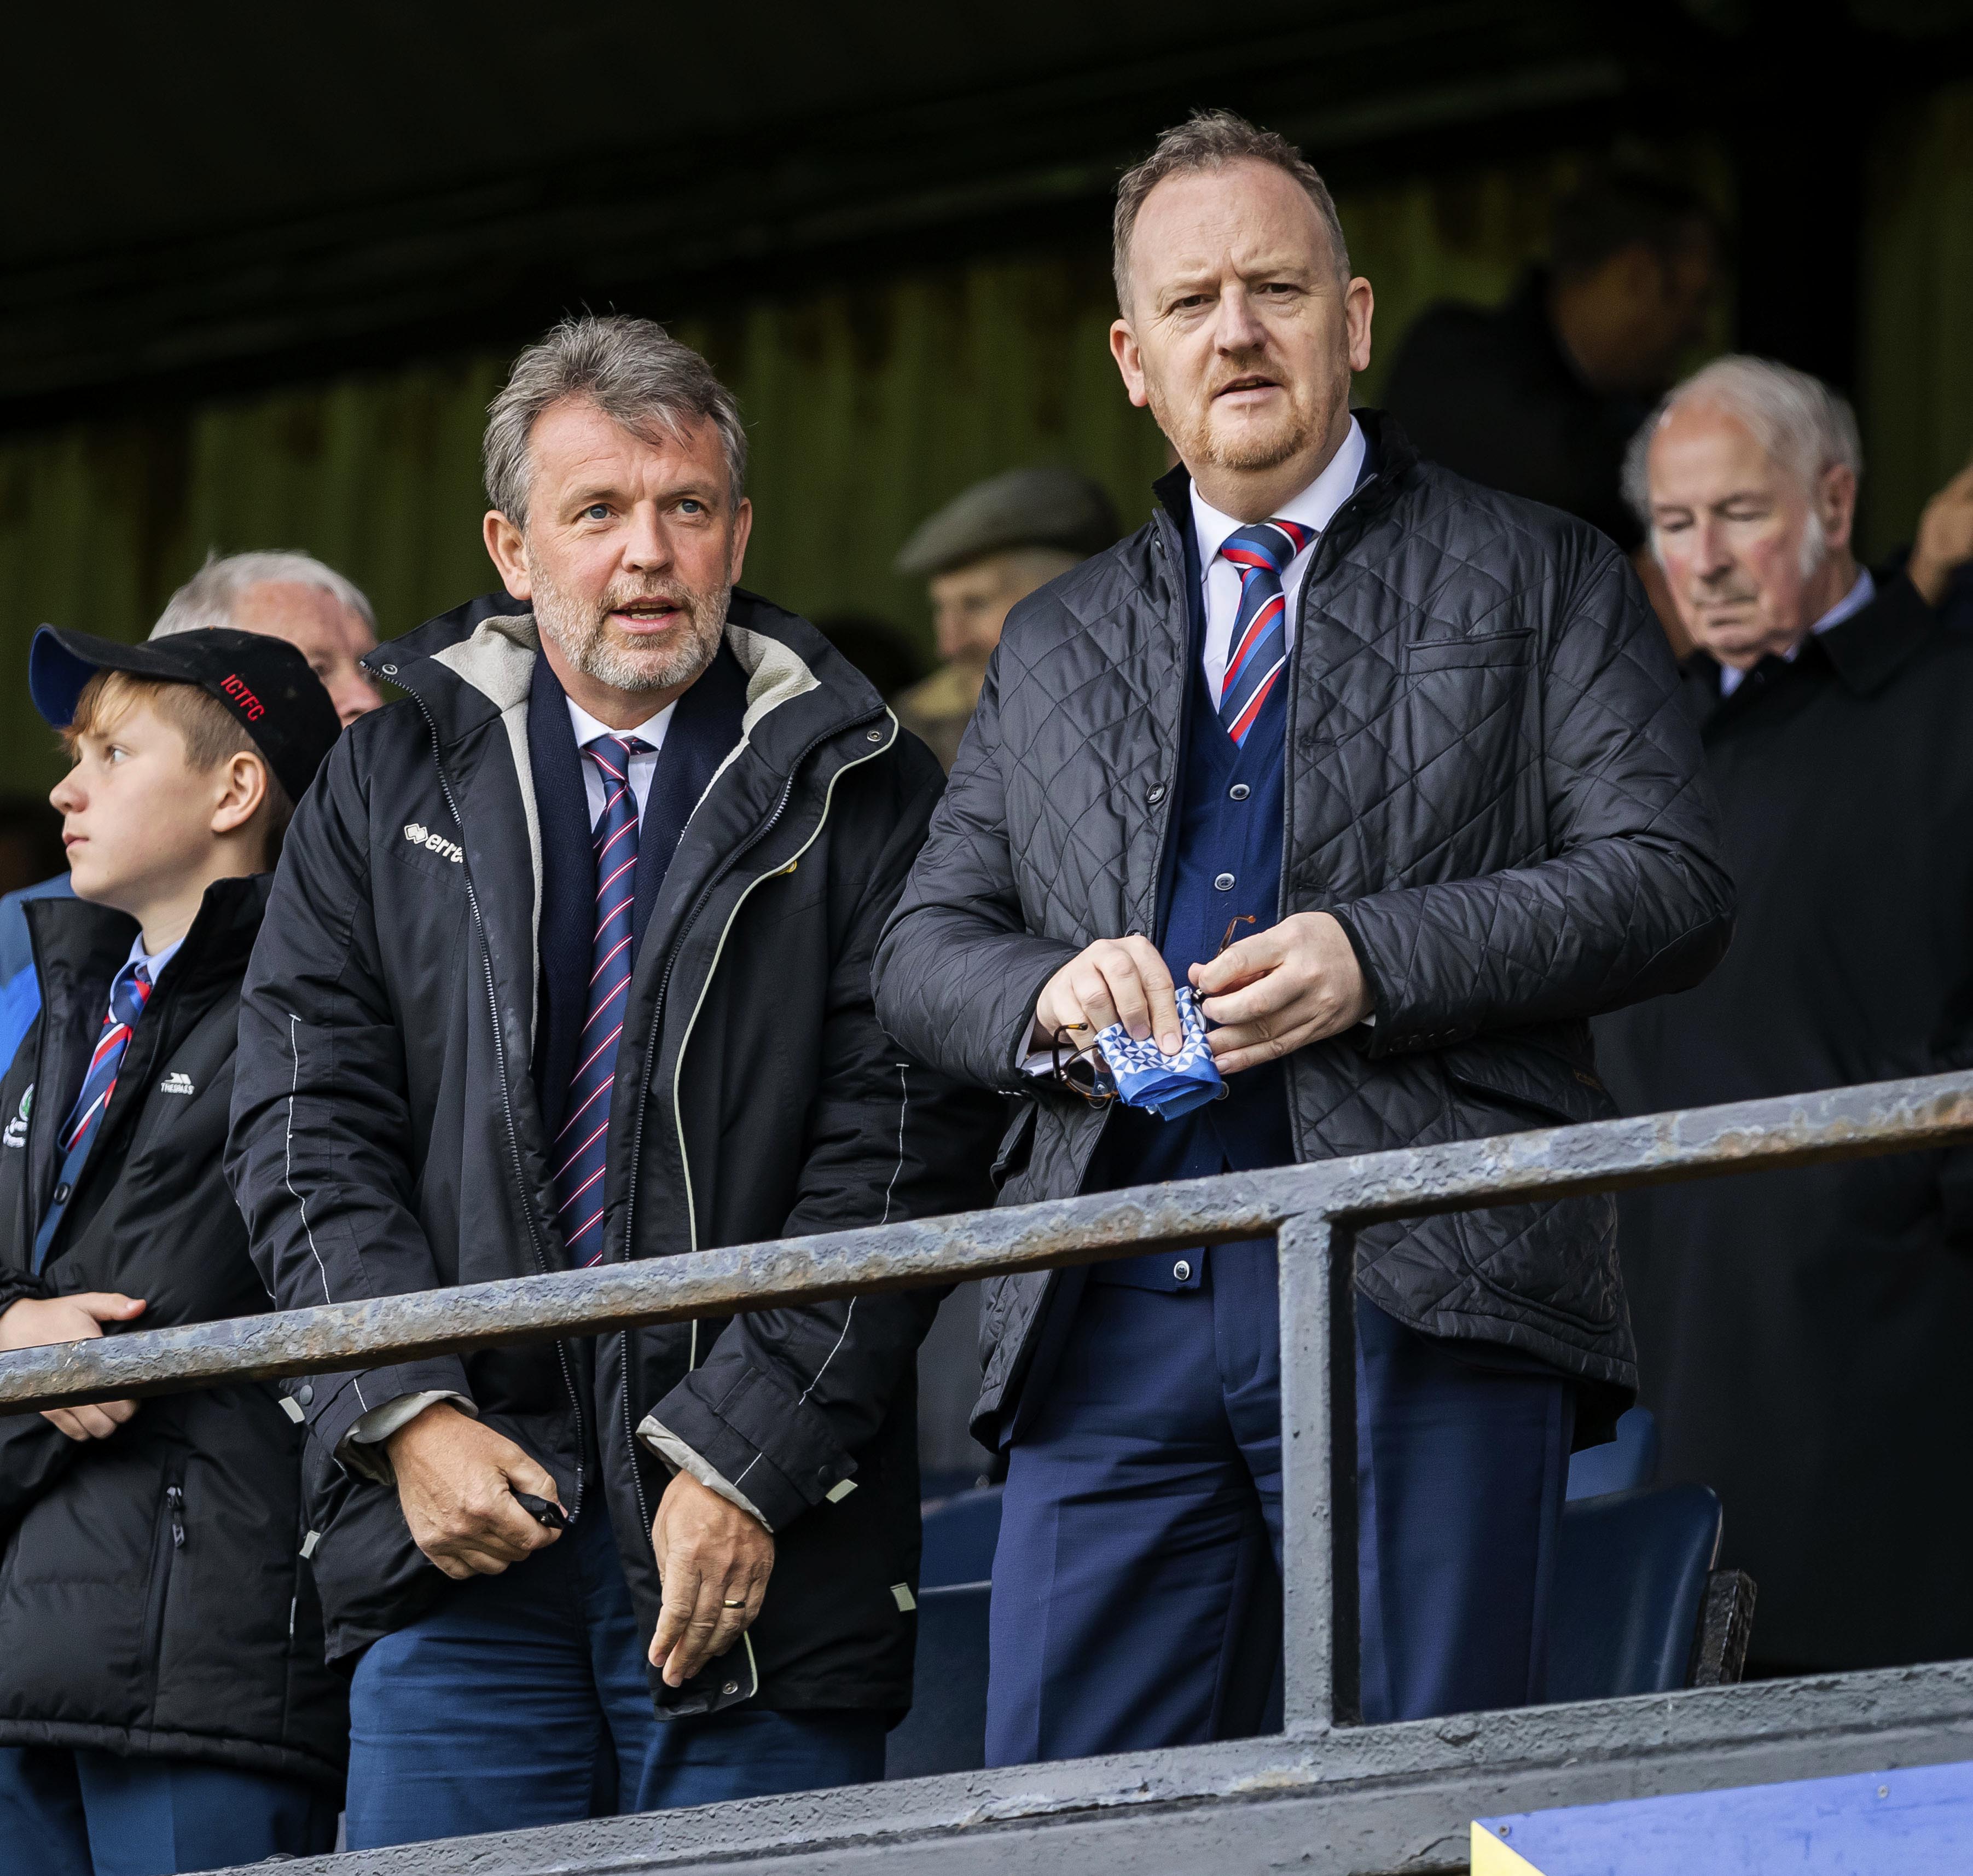 AYR, SCOTLAND - OCTOBER 05: Inverness Chief Executive Scot Gardiner (R) is pictured during the Ladbrokes Championship match between Ayr United and Inverness CT, at Somerset Park, on October 05, 2019, in Ayr, Scotland. (Photo by Roddy Scott / SNS Group)